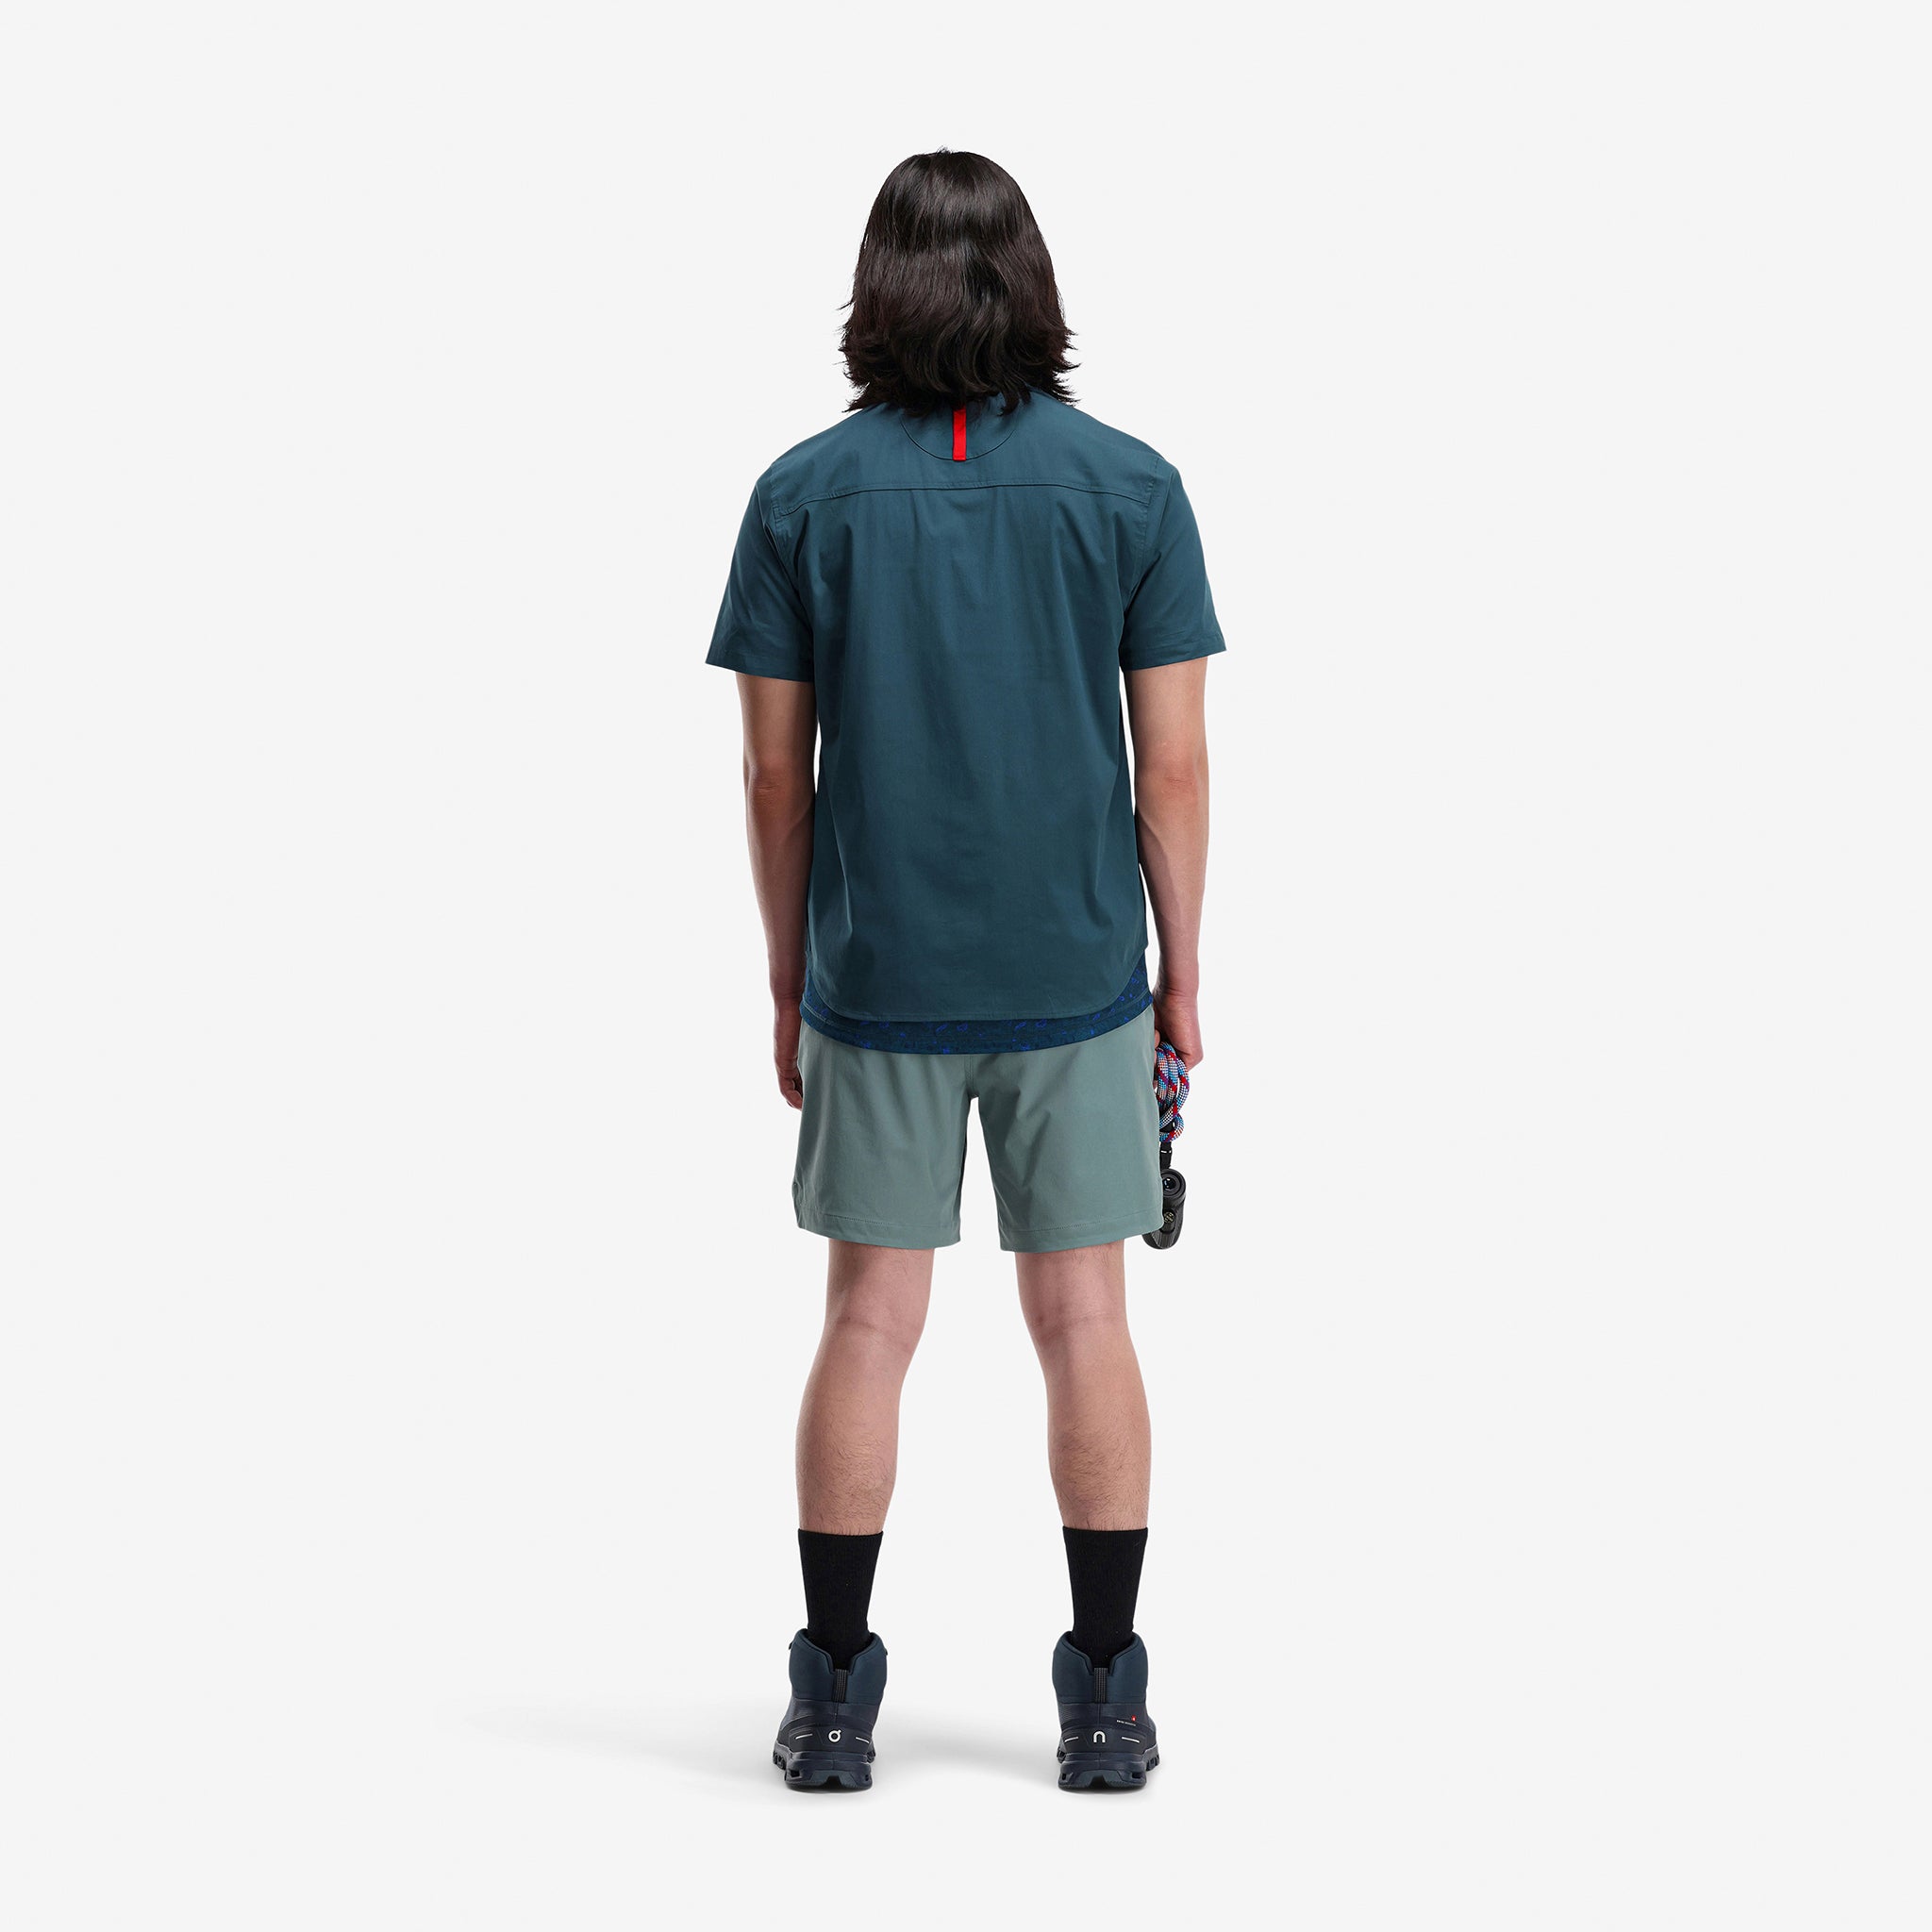 Back model shot of Topo Designs Men's Global lightweight quick dry travel Shorts in "Slate" blue gray. Show on "pond blue" and "brick".